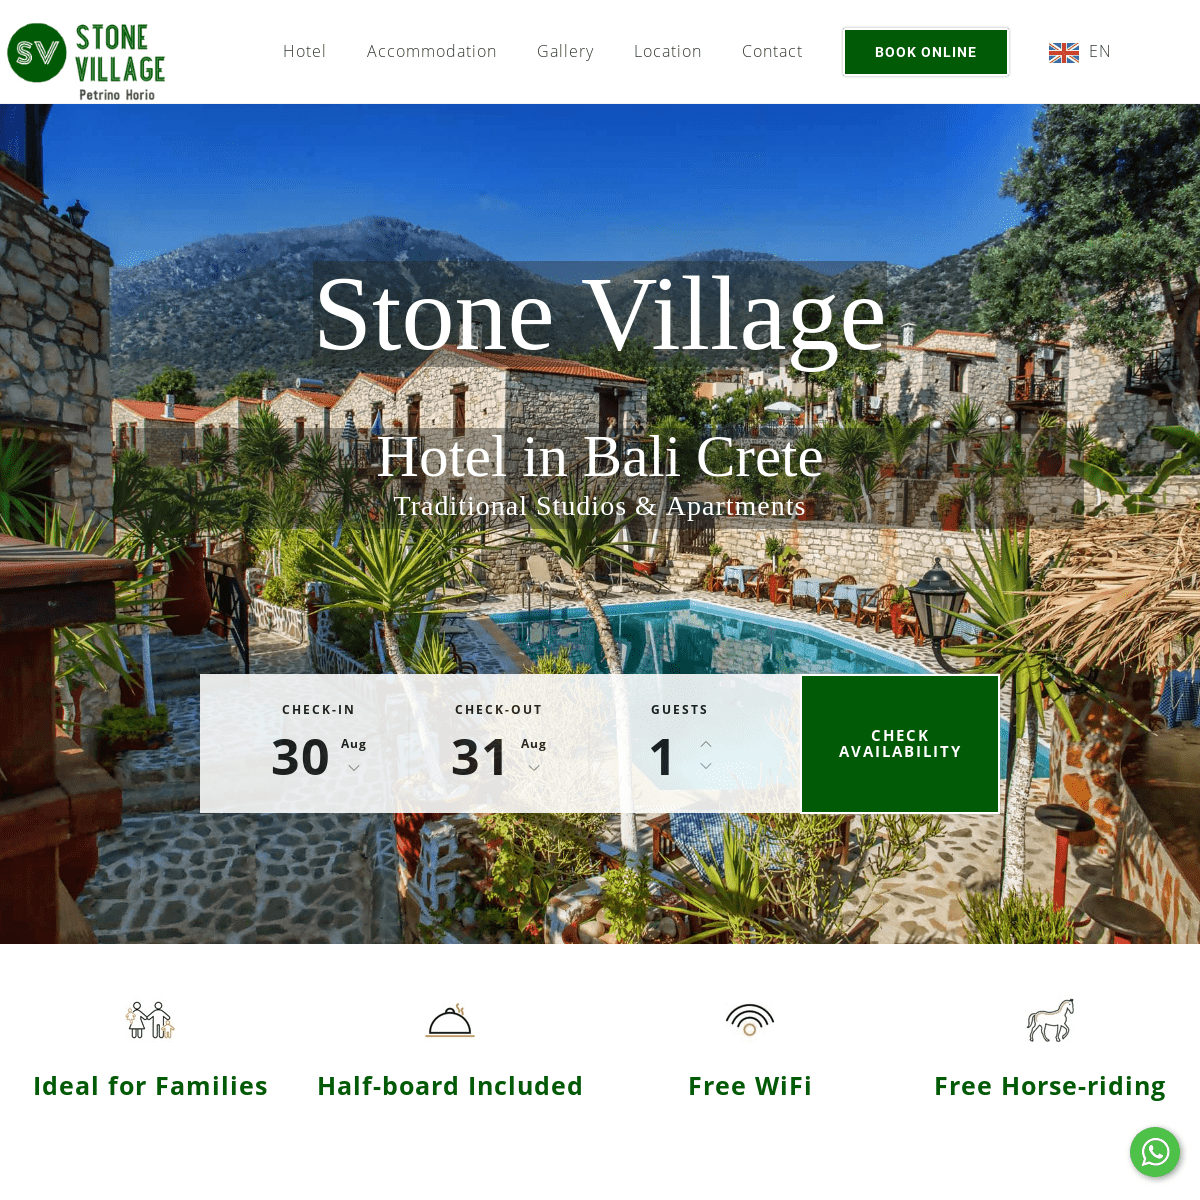 Hotel in Bali Crete | Stone Village (Official Website) | Experience it